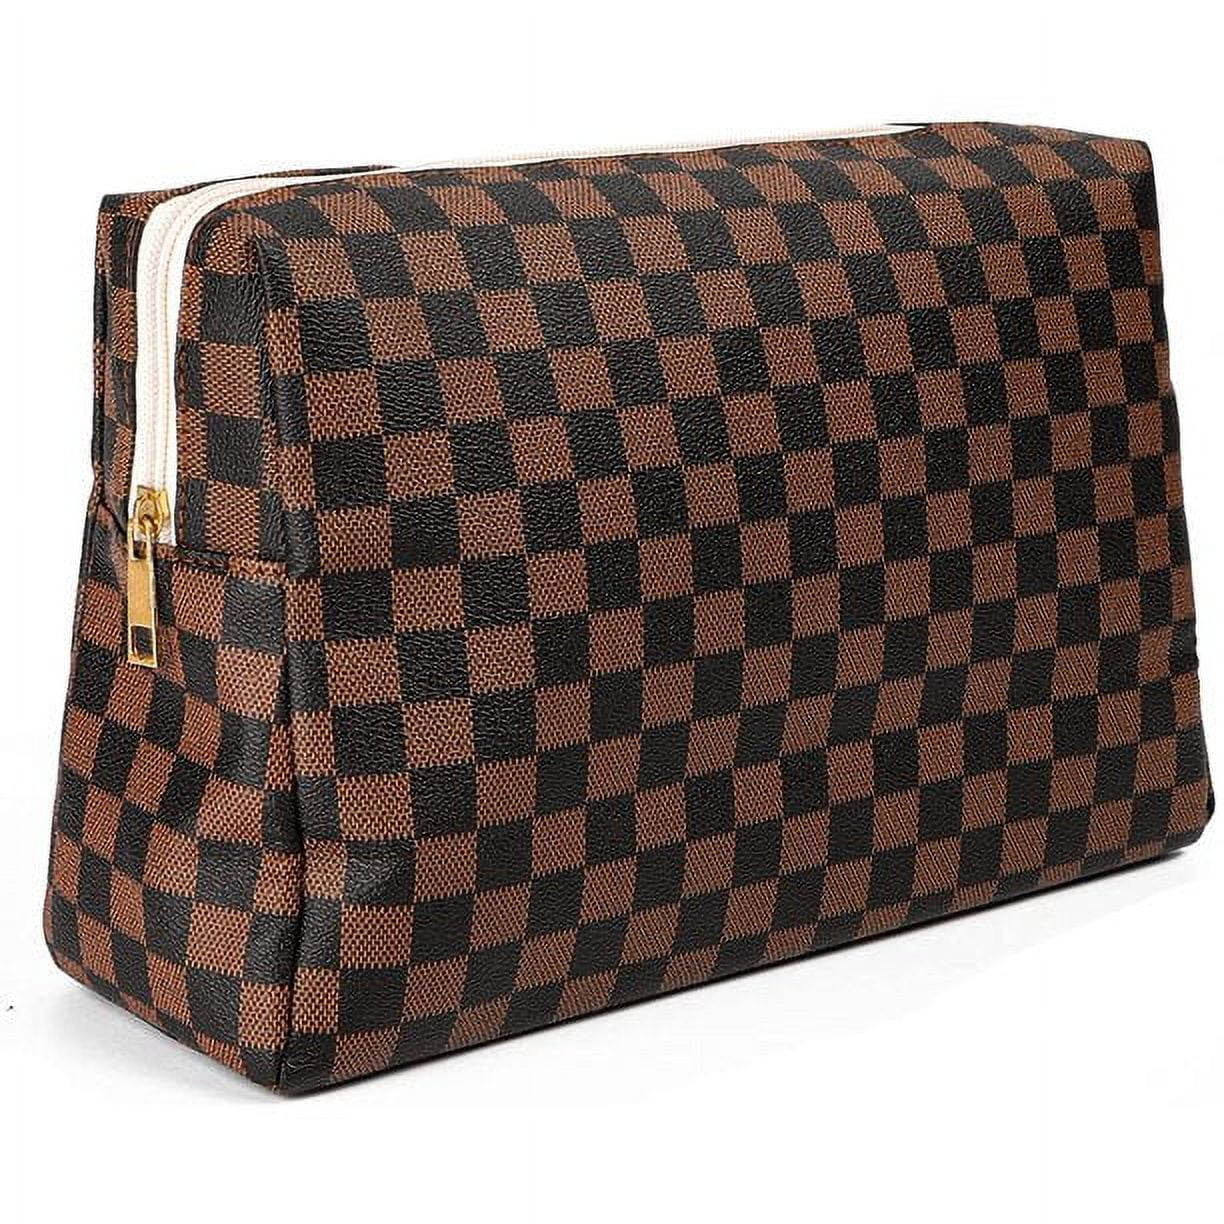 Treat your iPad to a Louis Vuitton makeover